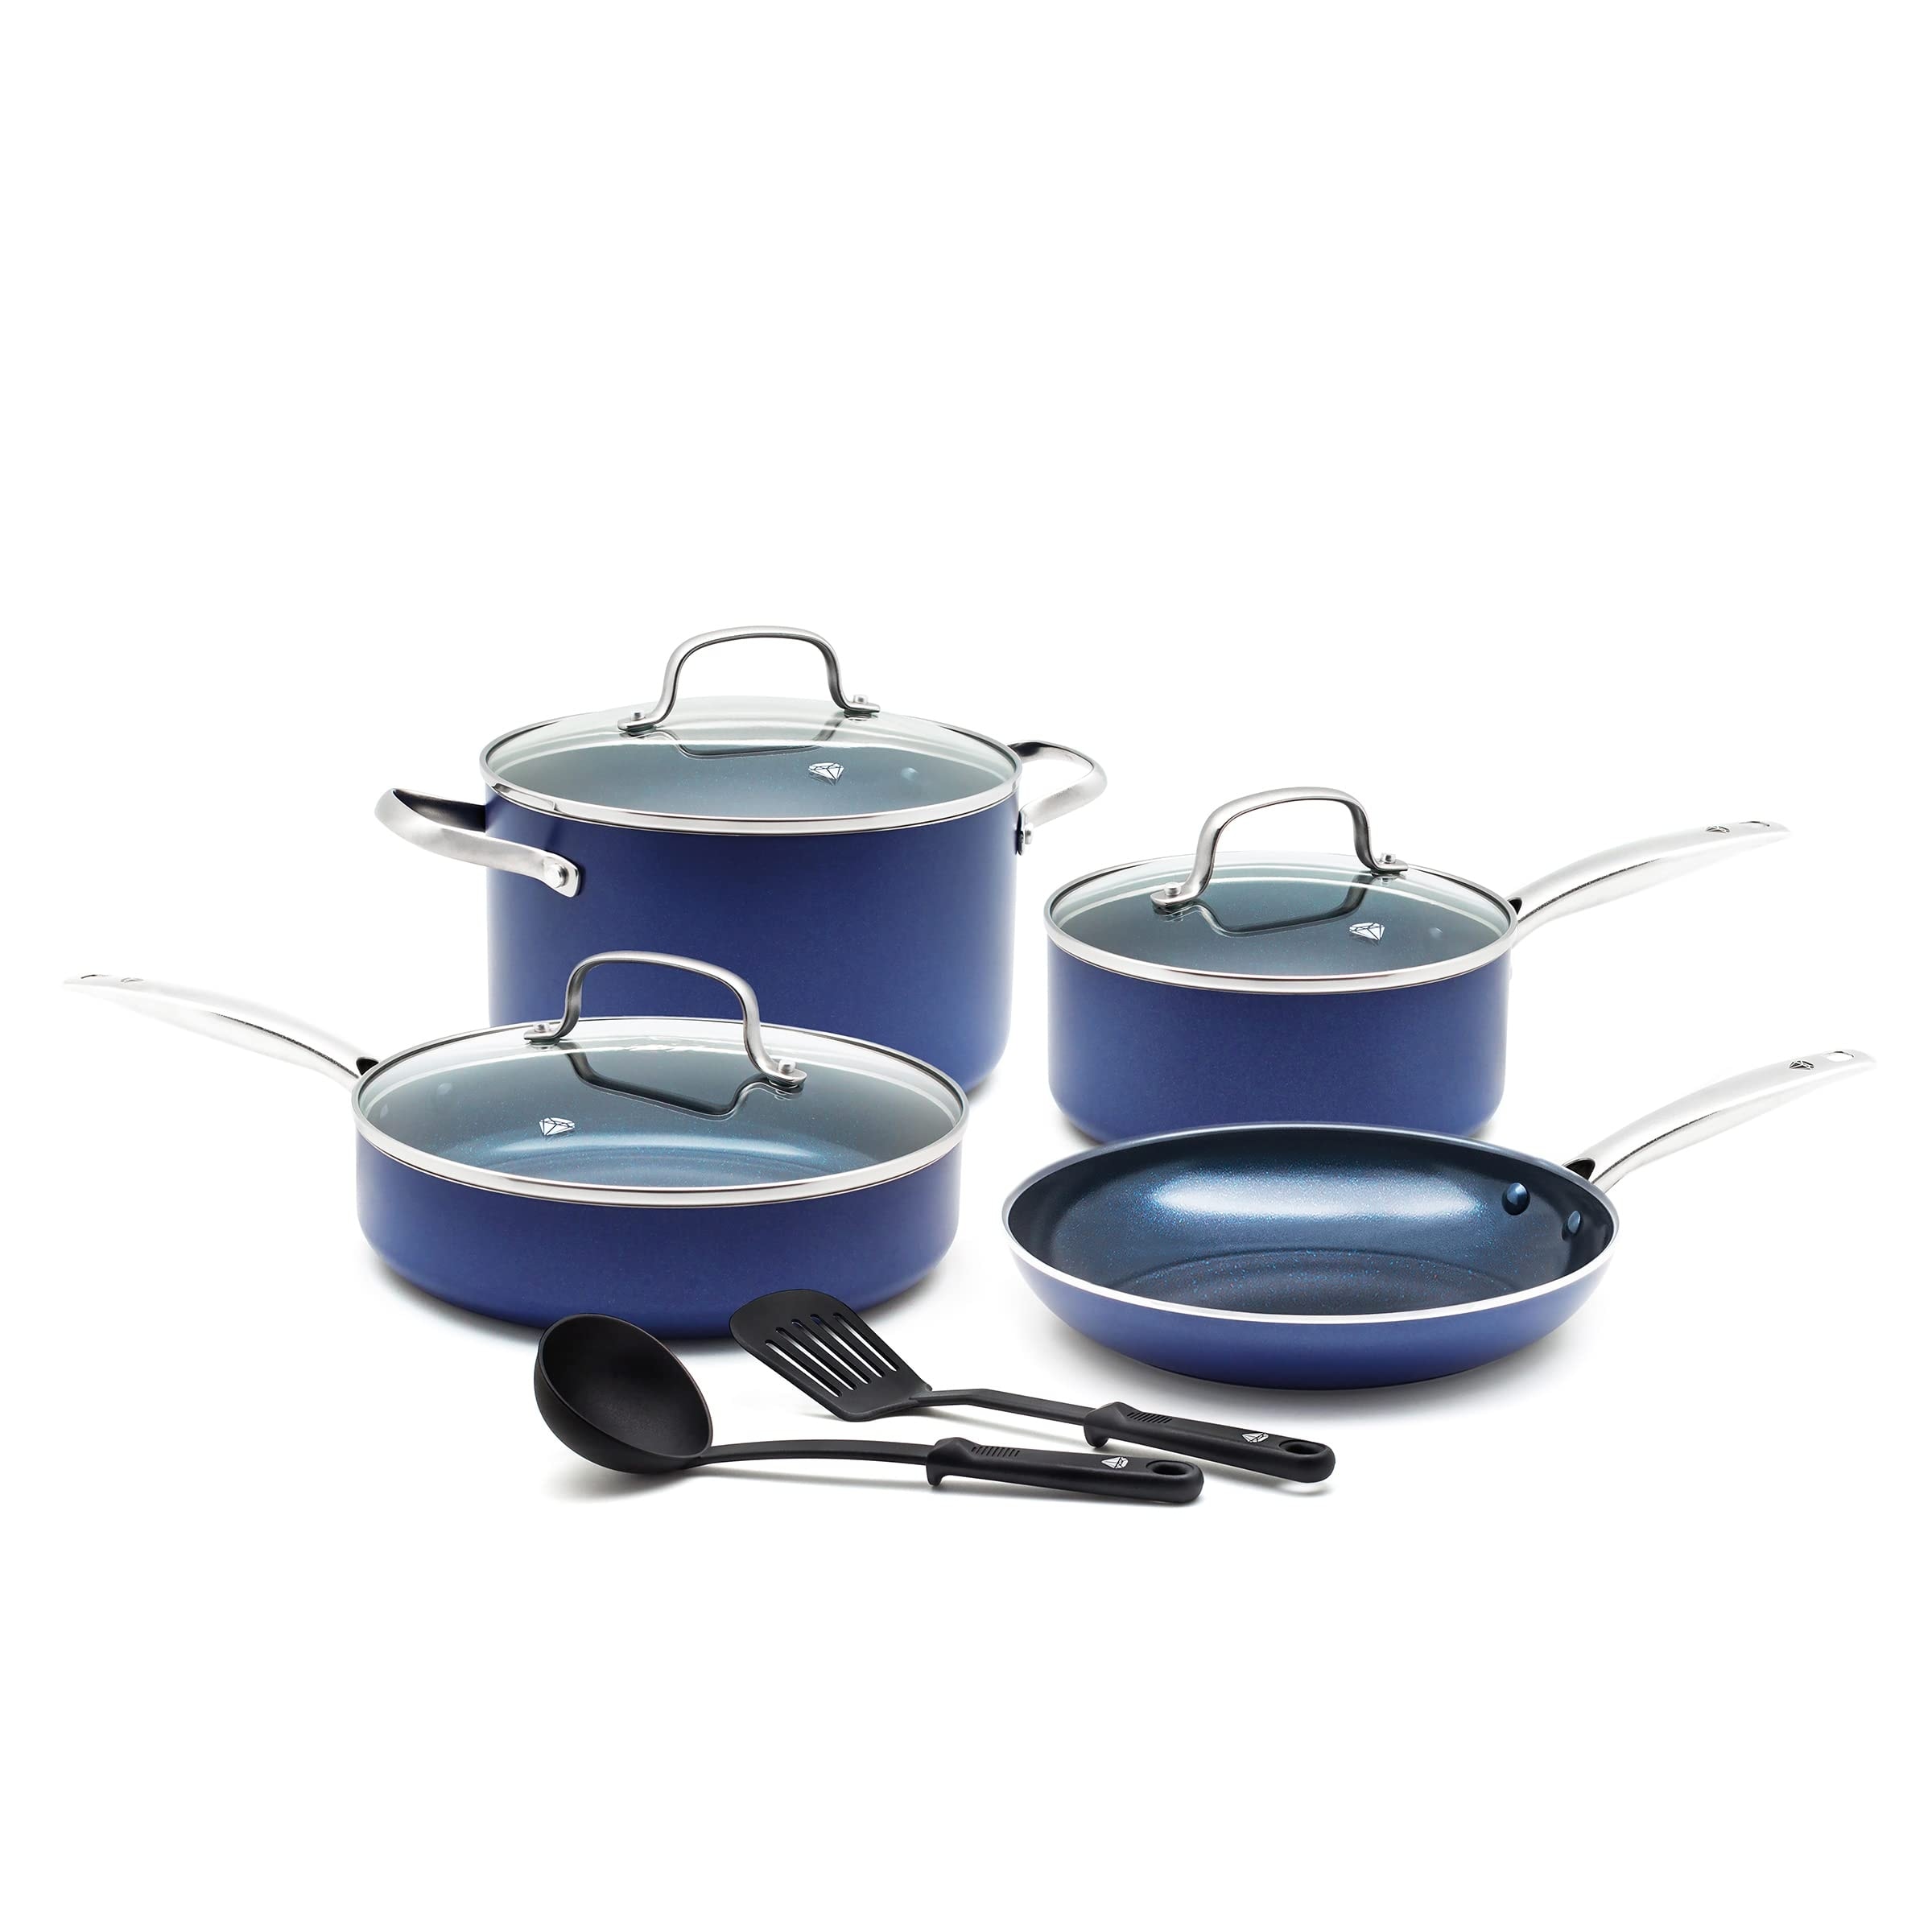 https://ak1.ostkcdn.com/images/products/is/images/direct/67294baef1f93d44a9ec1bd781438a59bf8a618d/Blue-Diamond-Cookware-Diamond-Infused-Ceramic-Nonstick-9-Piece-Cookware-Bakeware-Pots-and-Pans-Set%2C-PFAS-Free%2C-Dishwasher-Safe.jpg